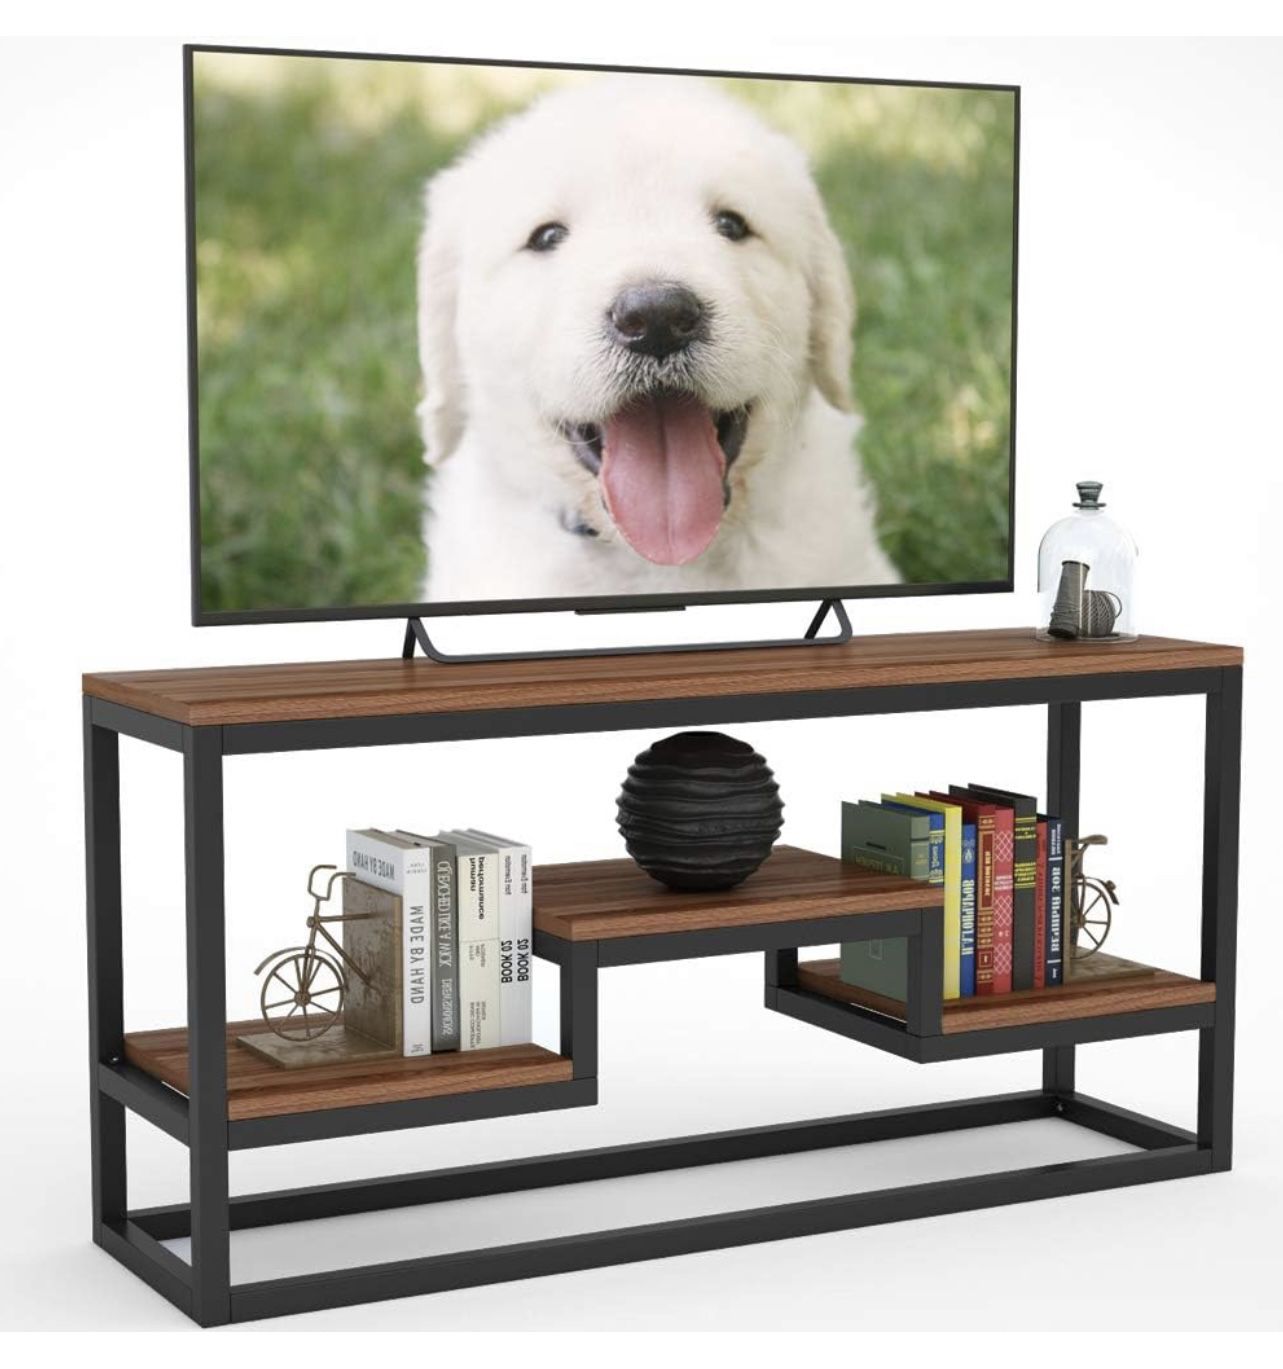 TV/Media Stand for Large 60” TV with 3 Shelves 